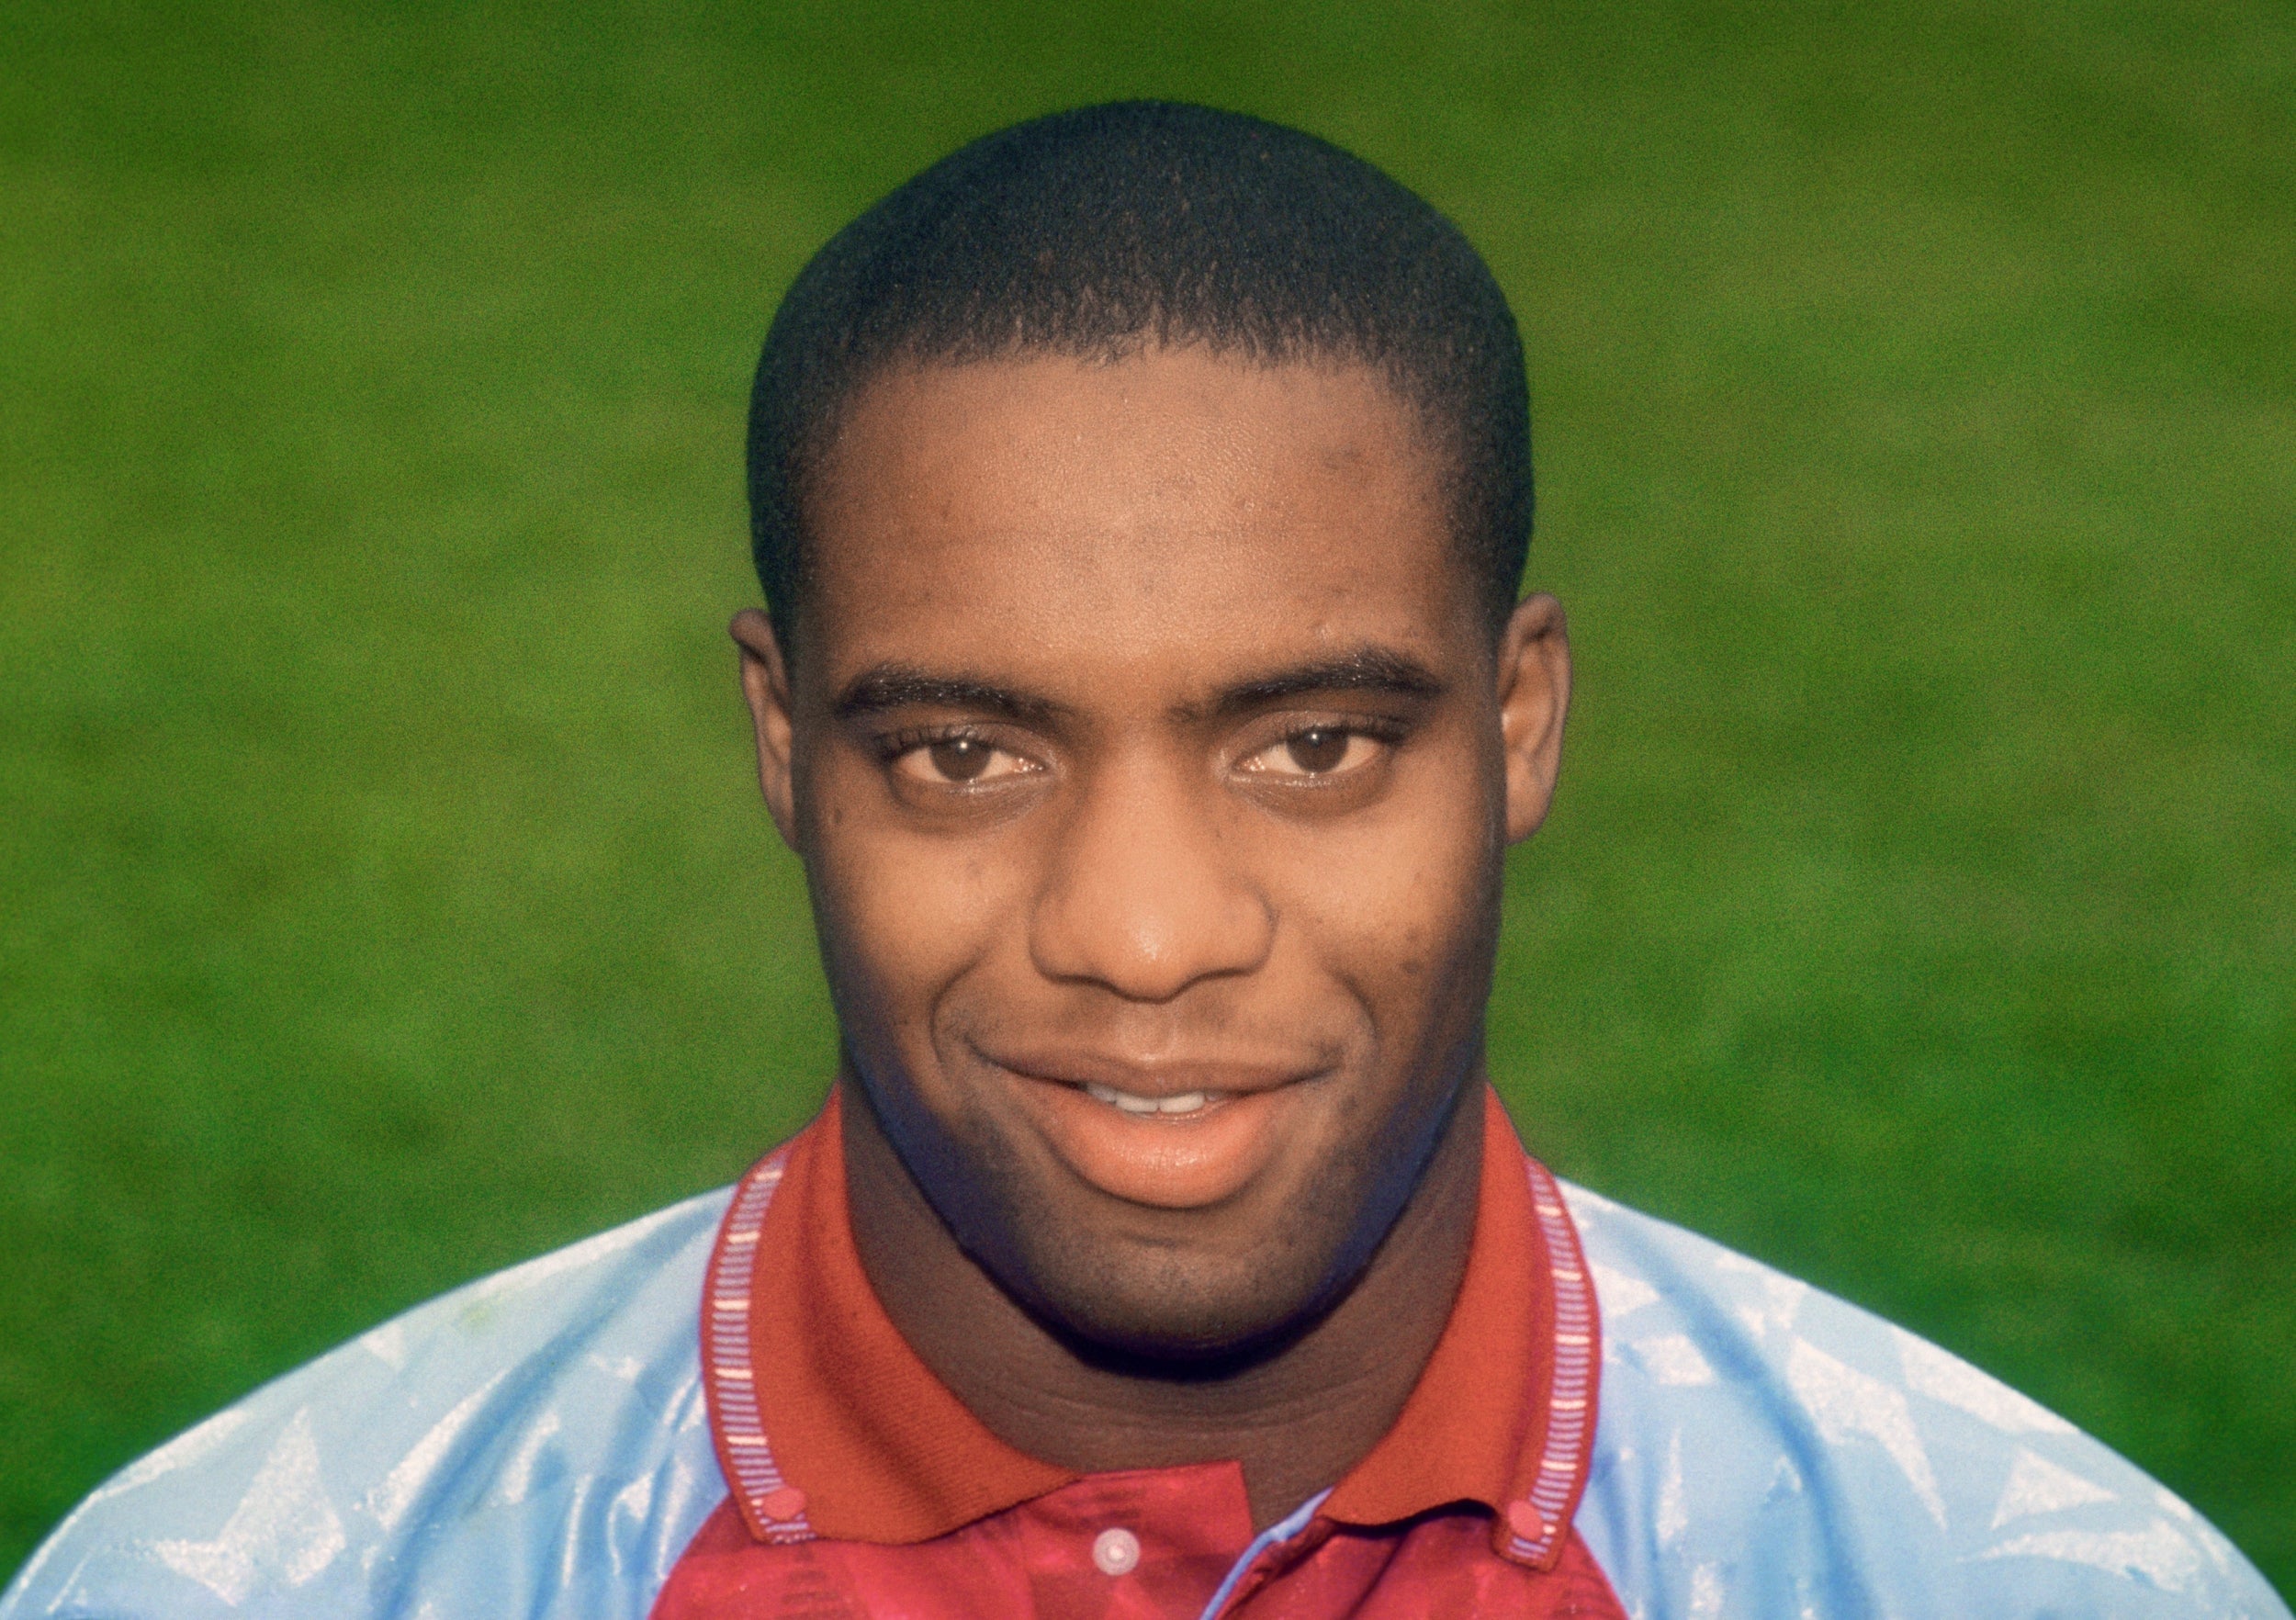 Former footballer Dalian Atkinson is among the people to have died after being Tasered, although an inquest has not yet established the cause of his death